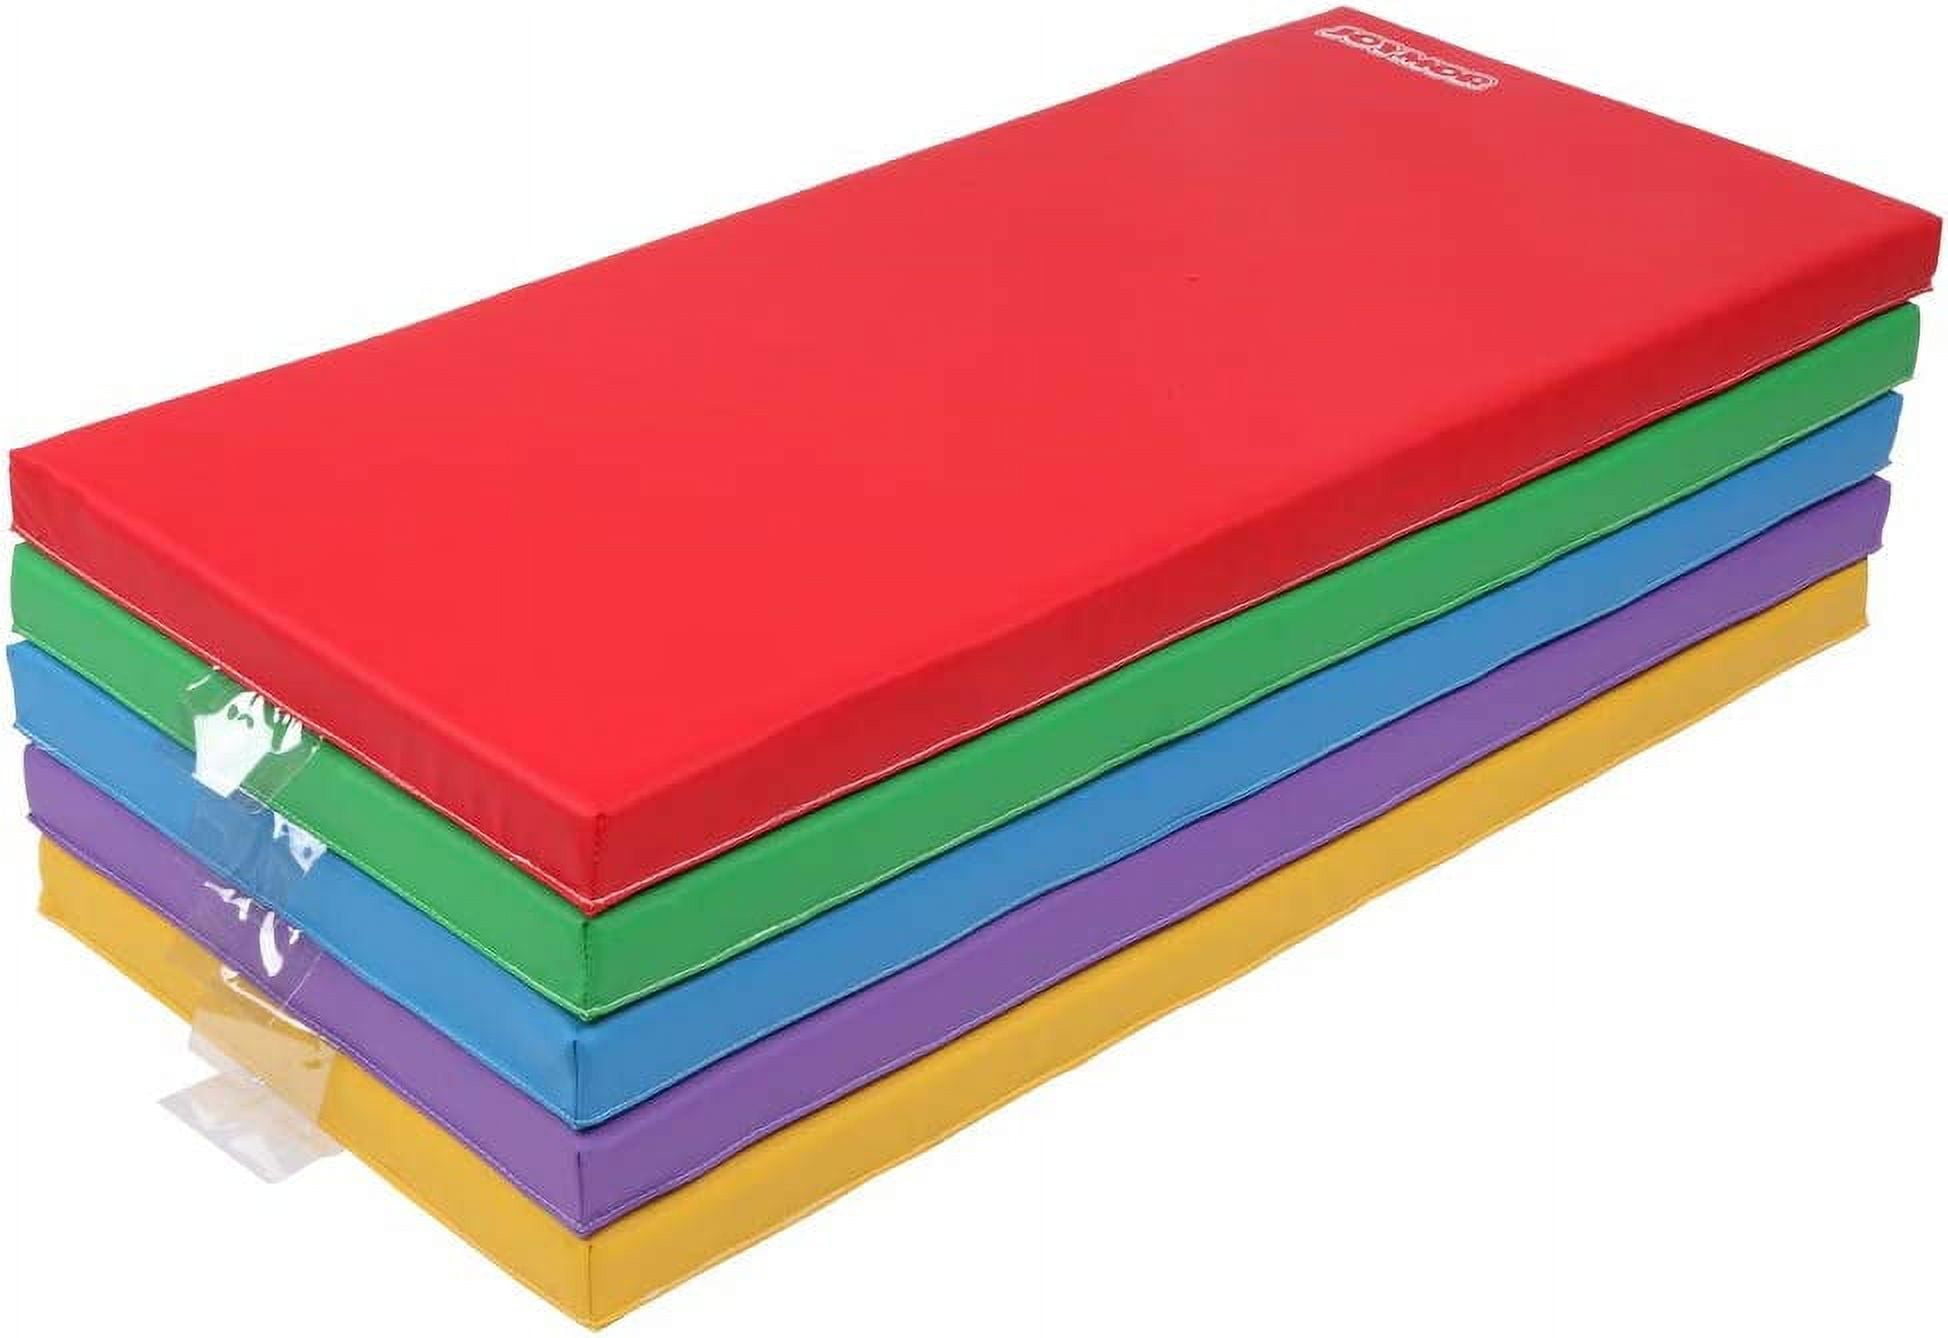 10 Pcs Thick Daycare Rest Mat Sponge Portable Rest Napping Mat with Name  Tag Holder Toddler Preschool Sleeping Floor Mat for Kids School, Daycare,  and